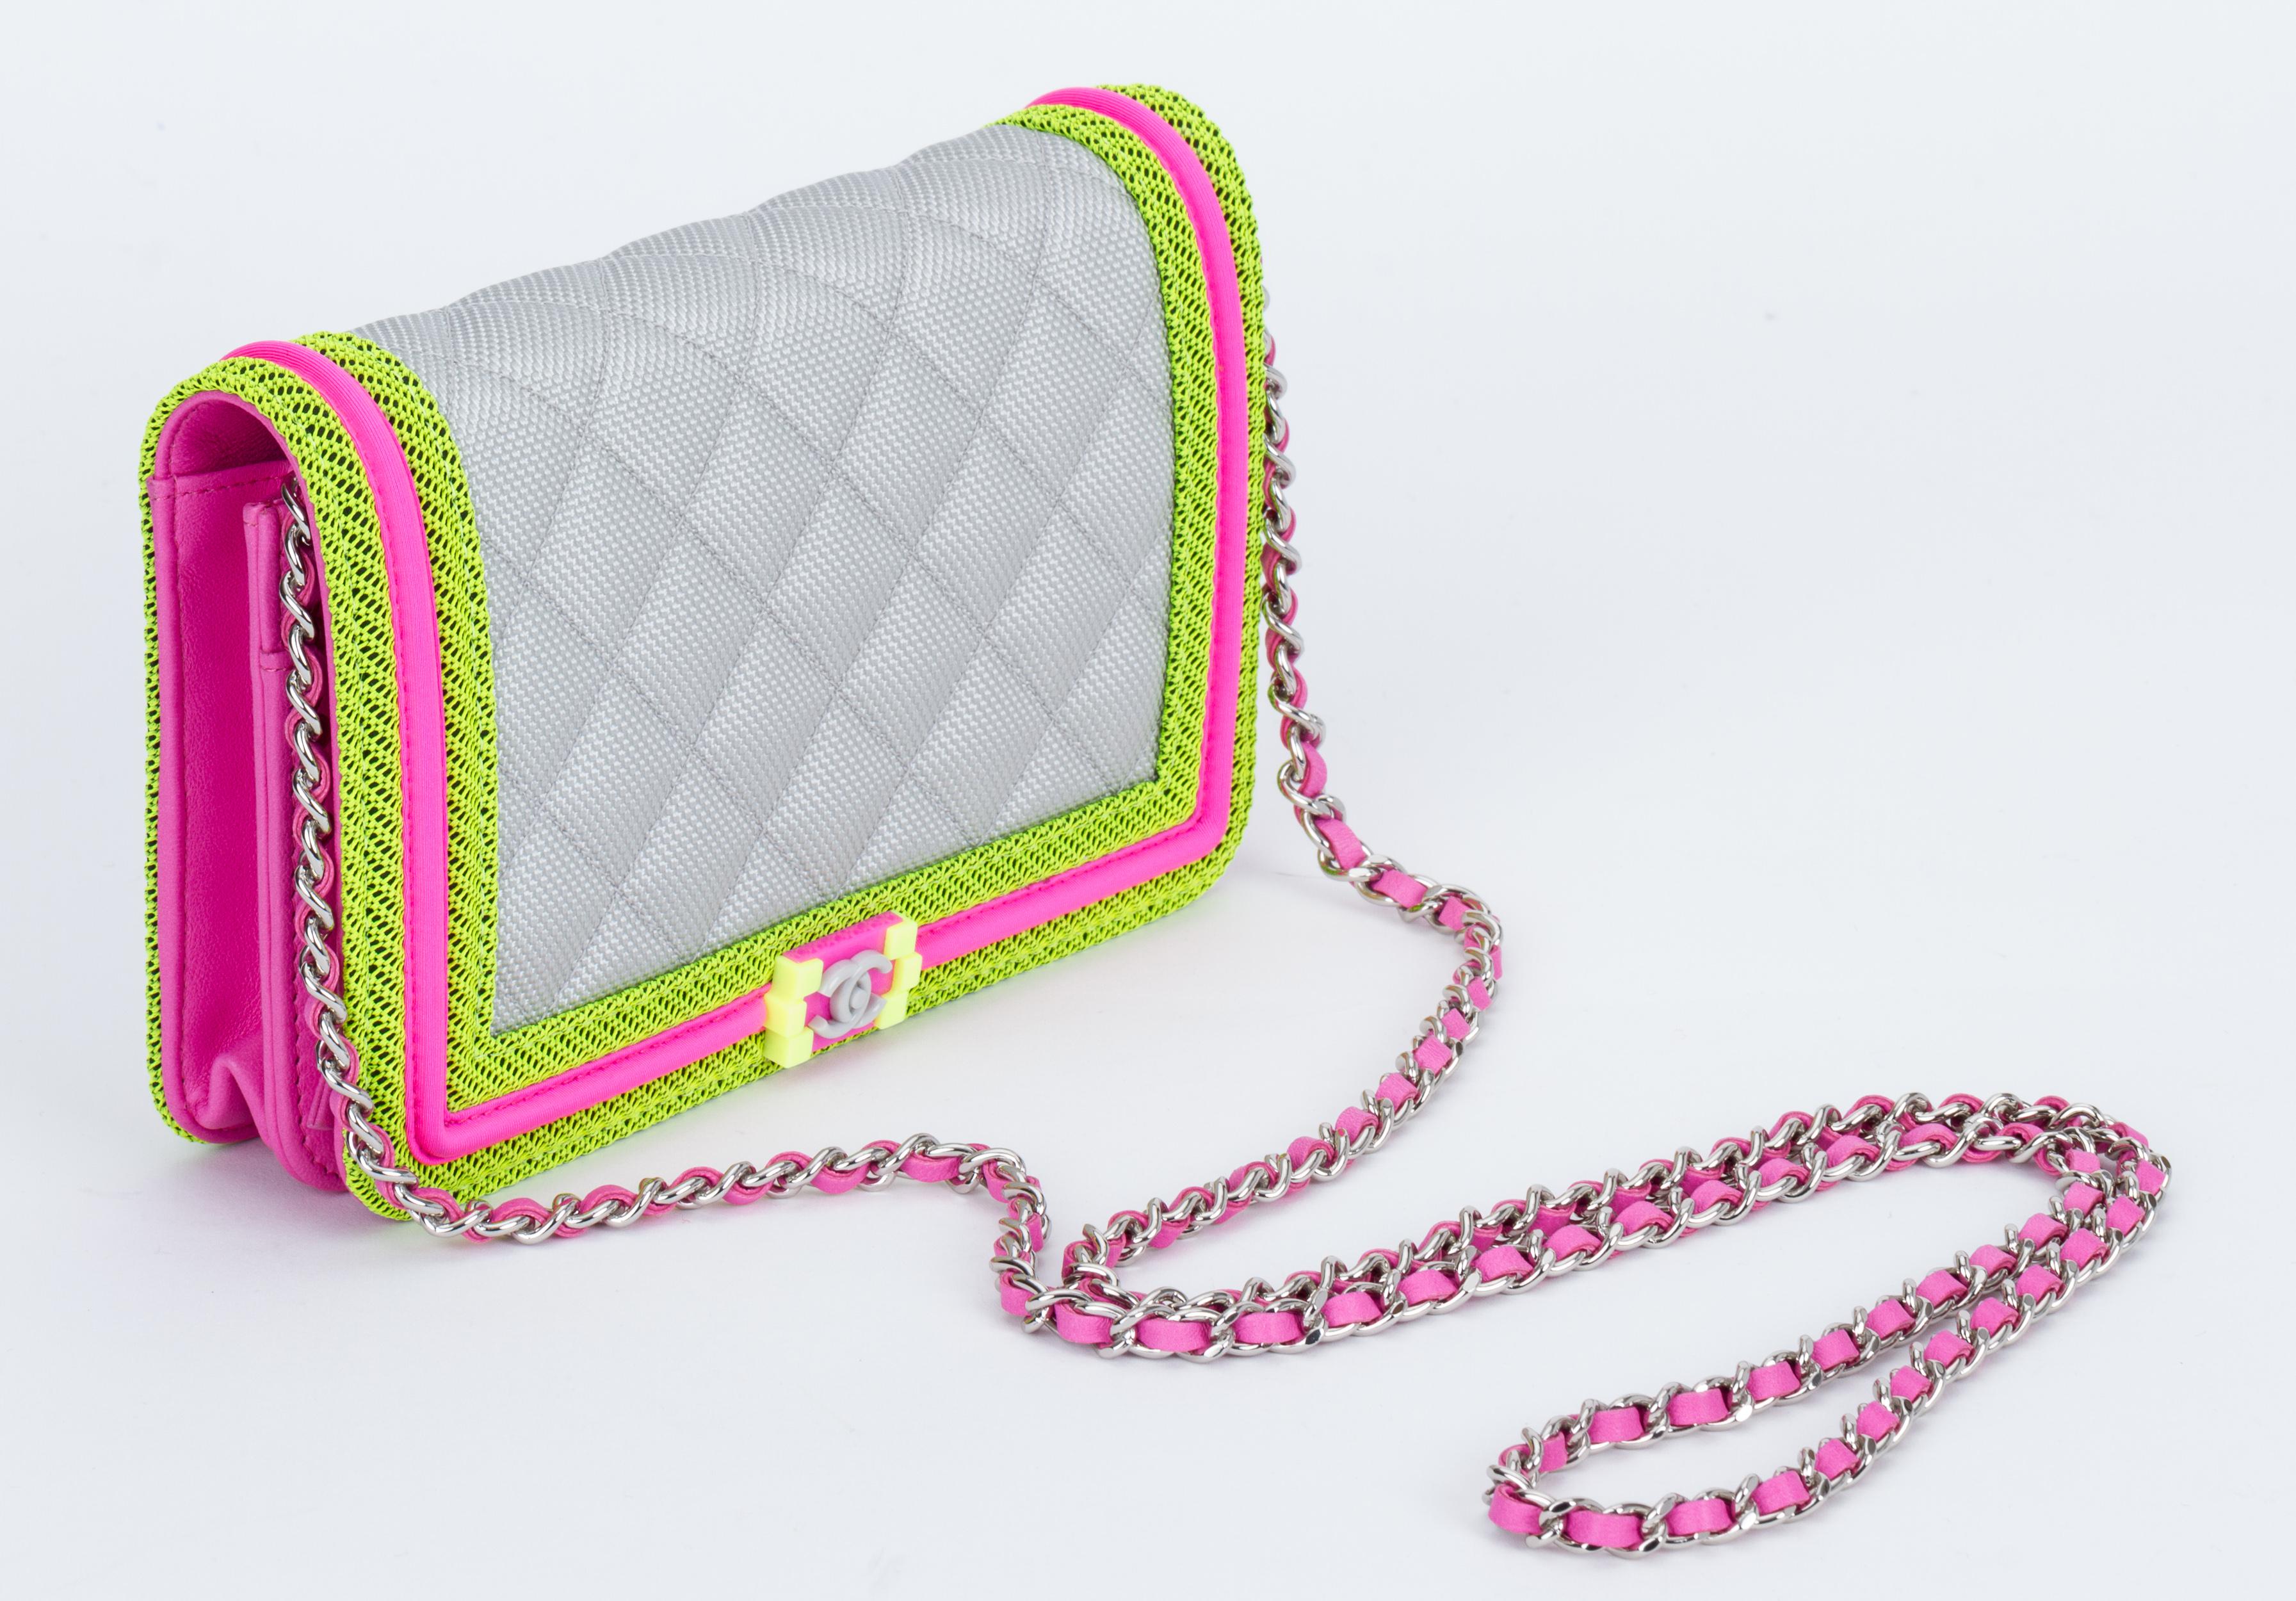 Chanel brand new in box boy bag fluorescent wallet on a chain in grey, pink, yellow and silver tone metal. Shoulder drop 25